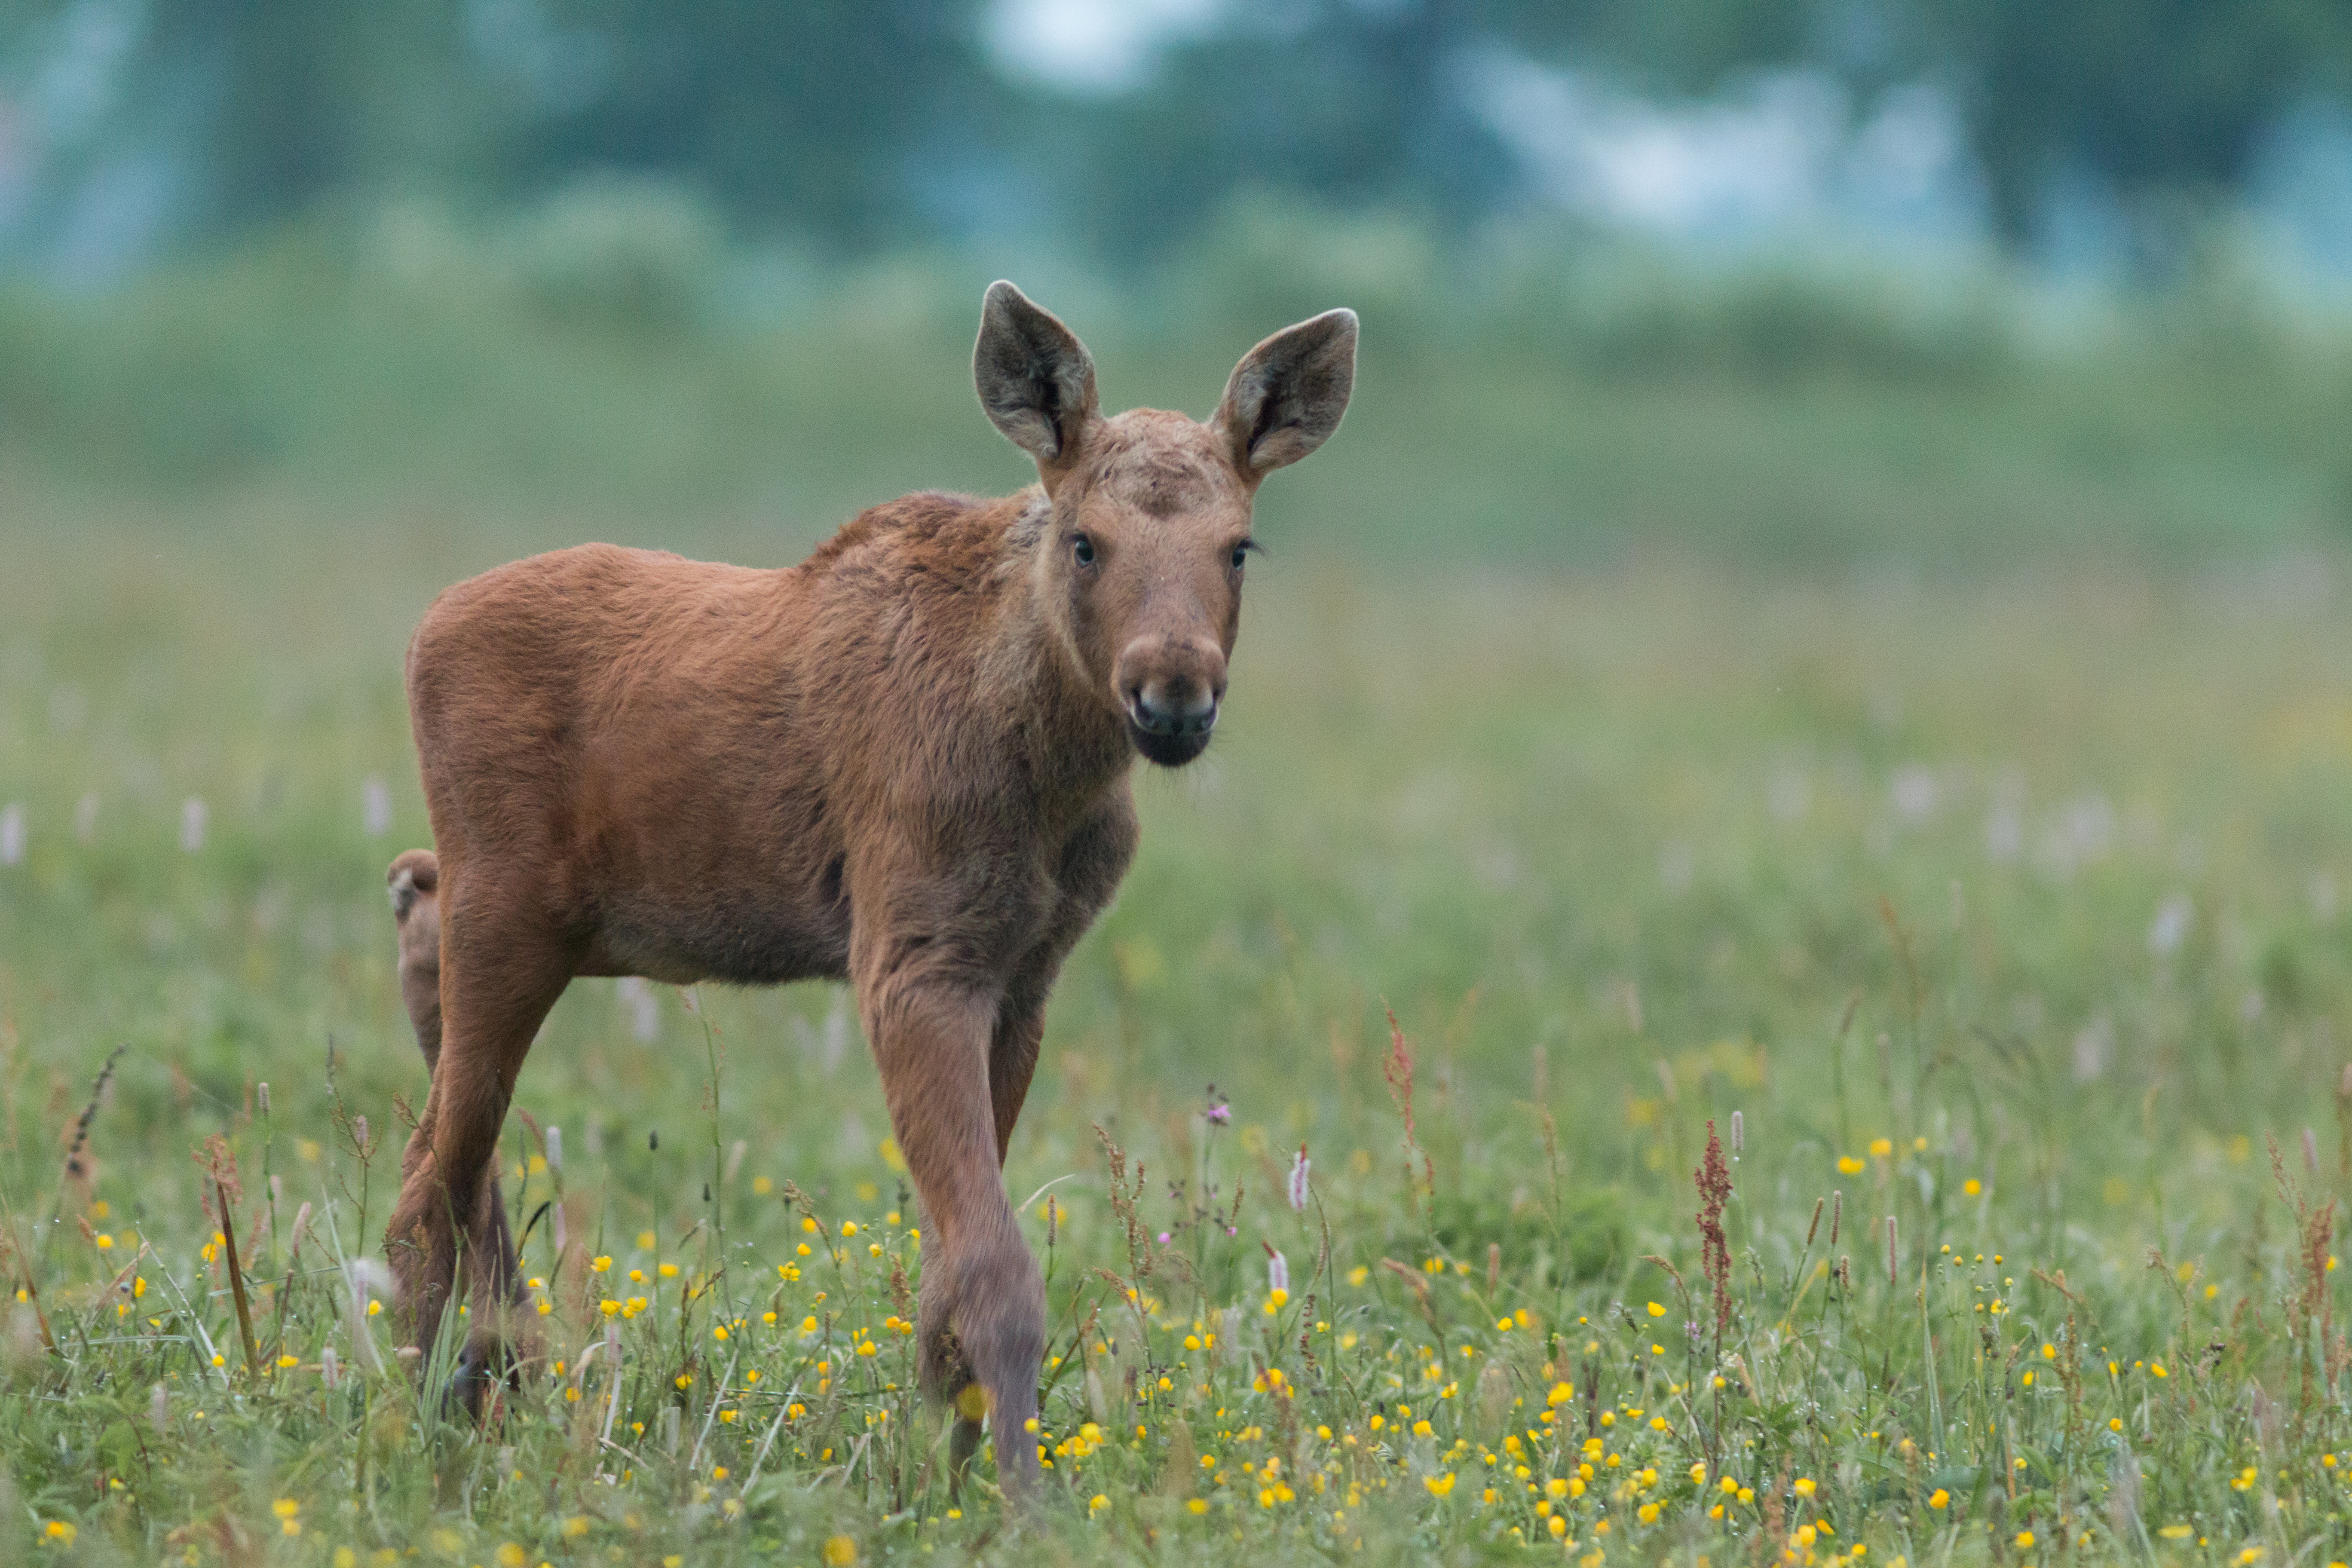 A picture of a moose calf